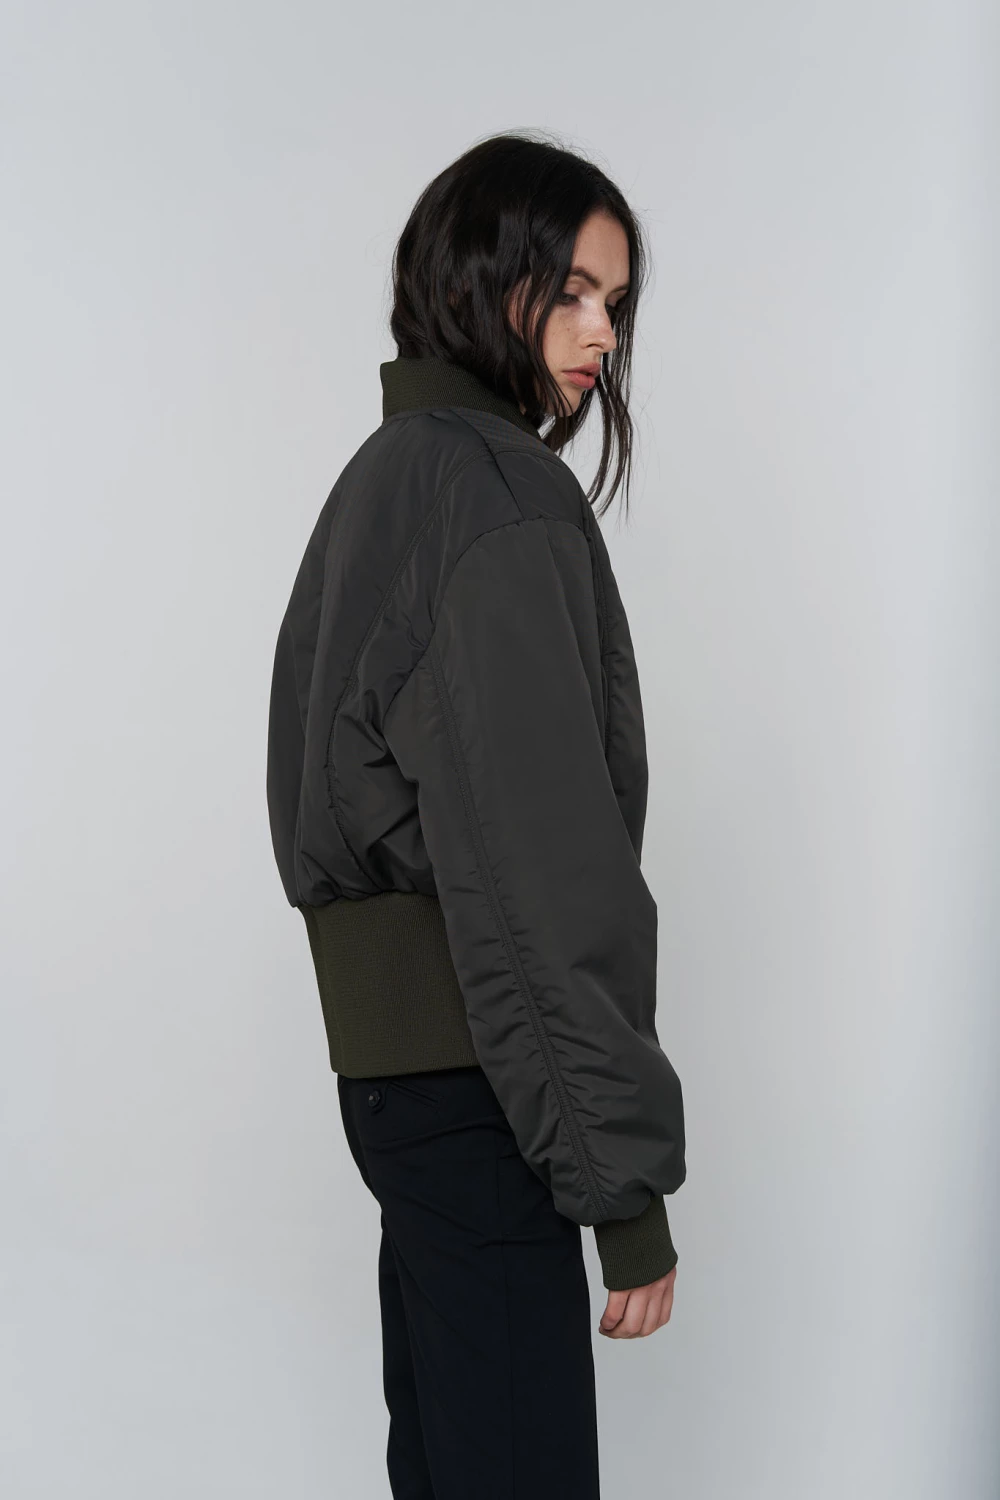 cropped bomber jacket in khaki color